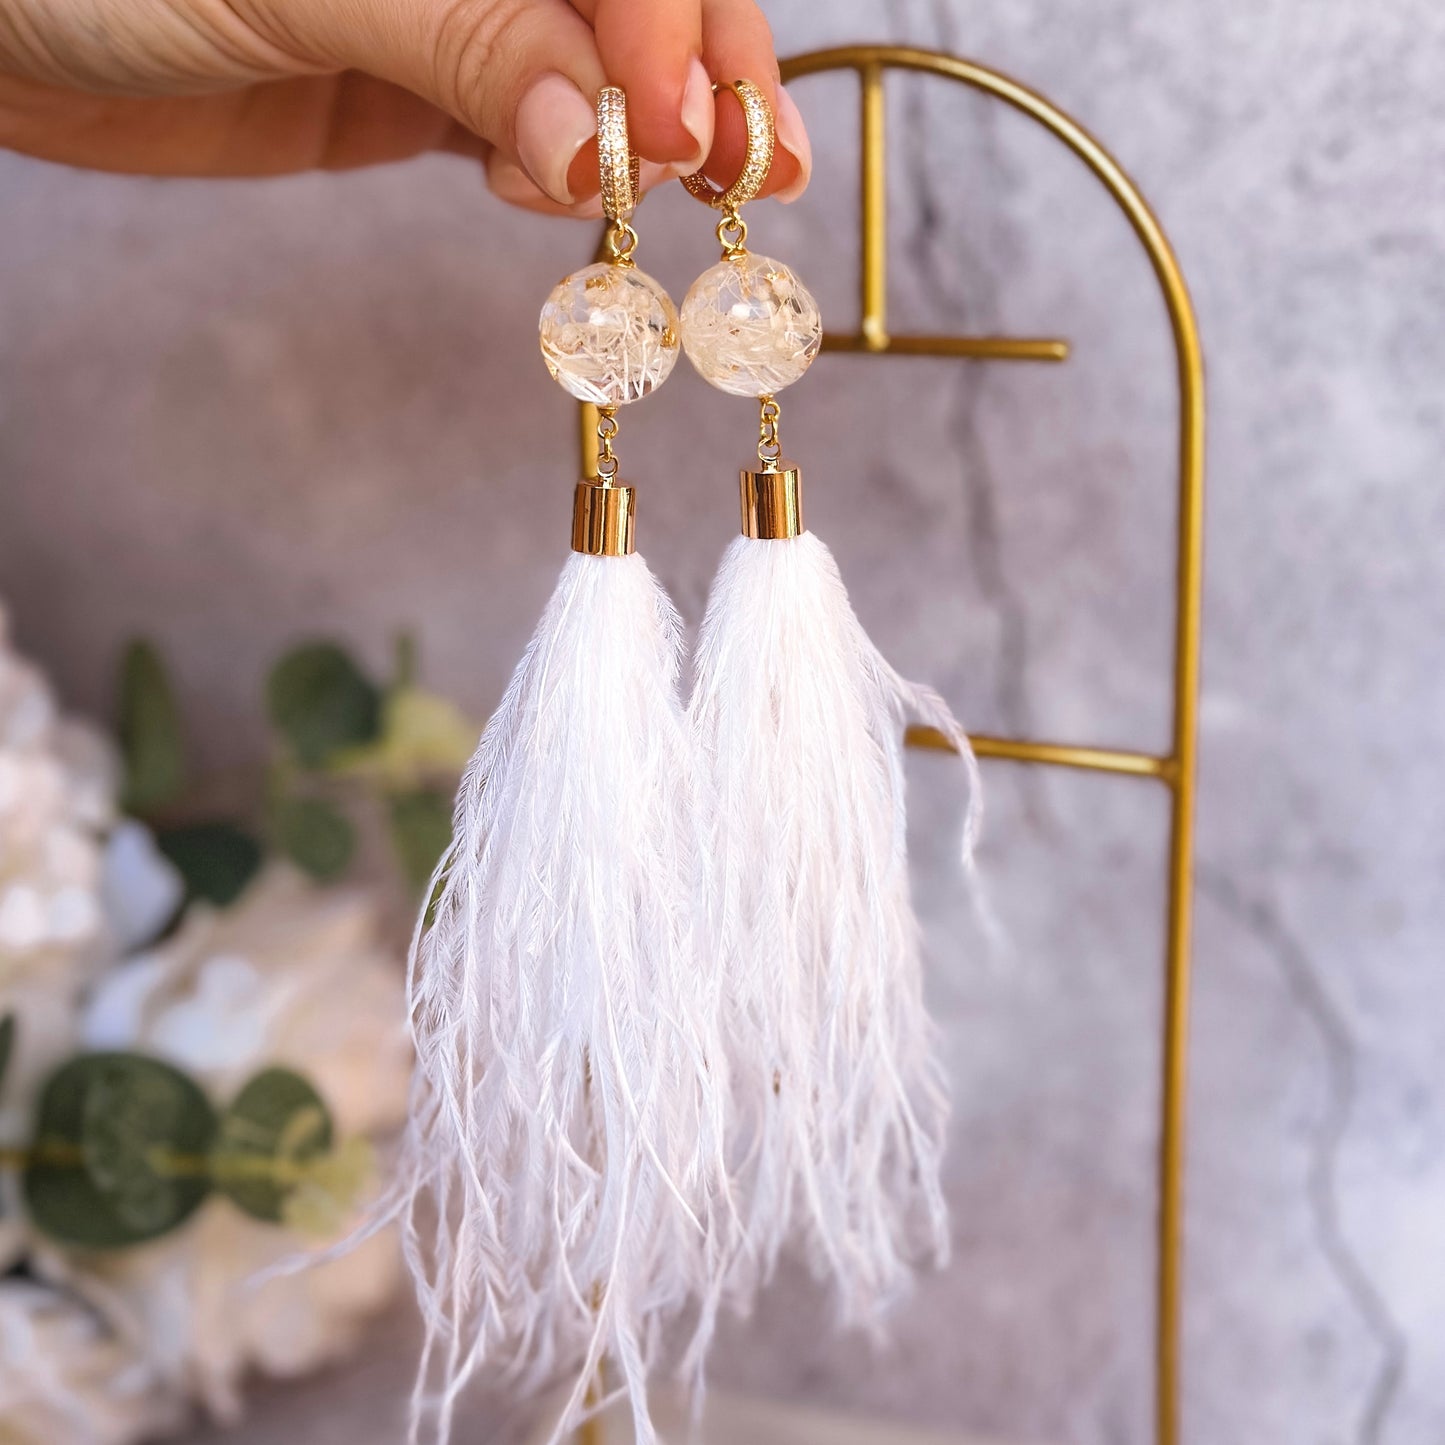 Exclusive White Earrings